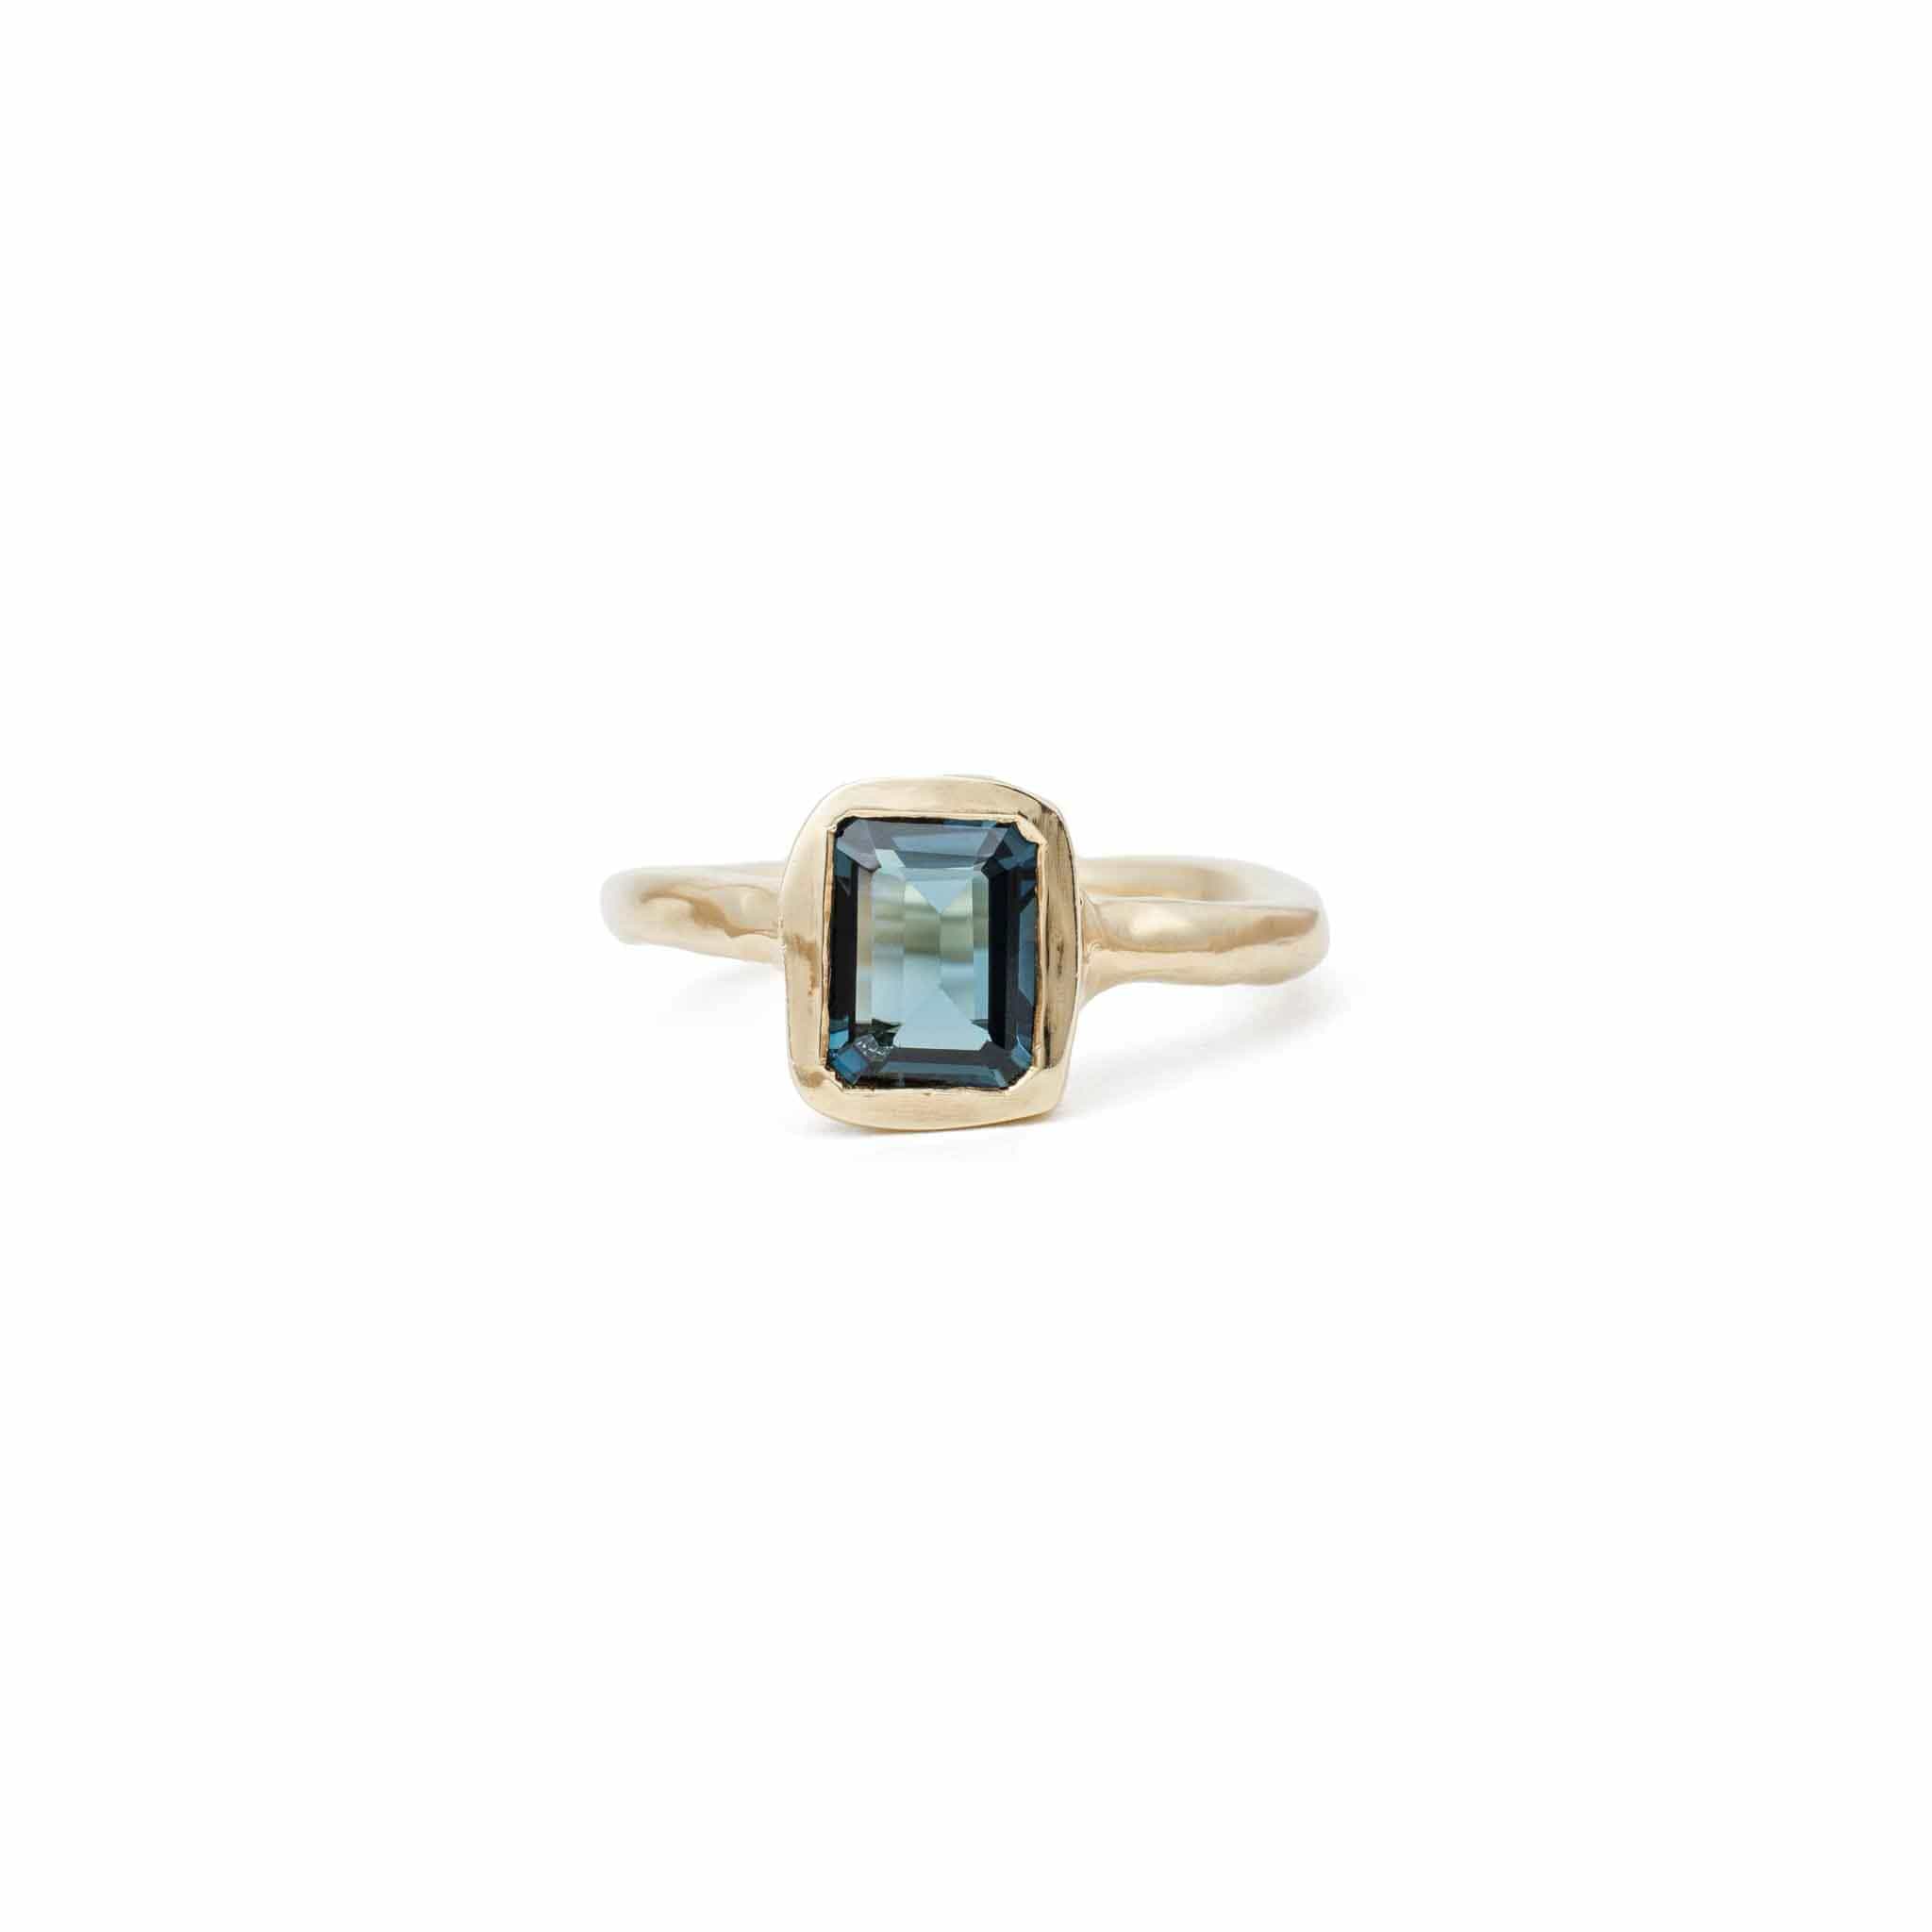 Lauren Ring - 9k yellow gold with London topaz  READY TO SHIP